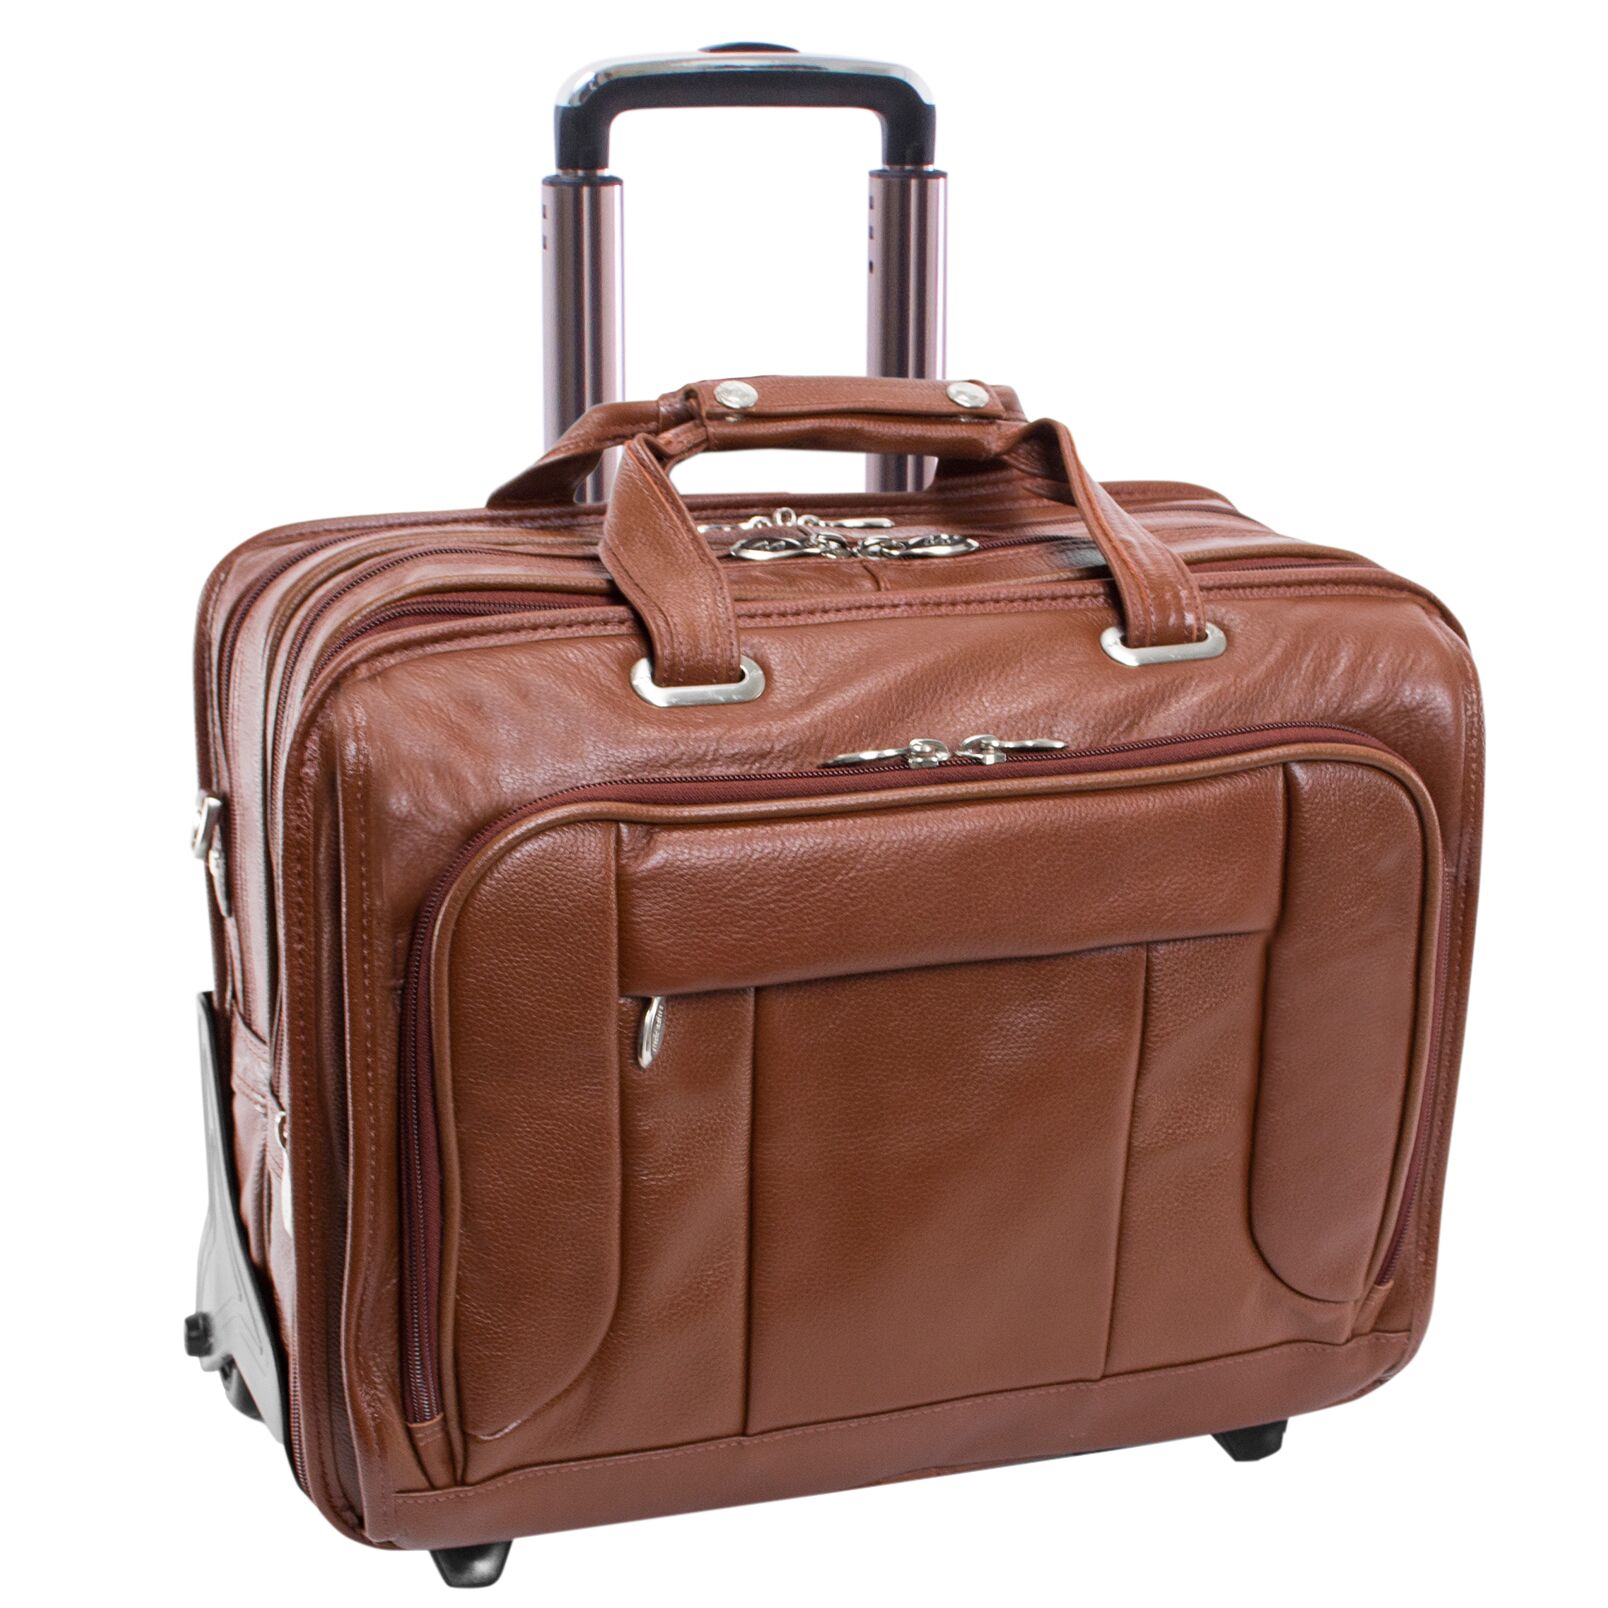 Mcklein 15704 17 Inch Brown West Town Leather Fly-through Checkpoint-friendly Detachable-wheeled Notebook C